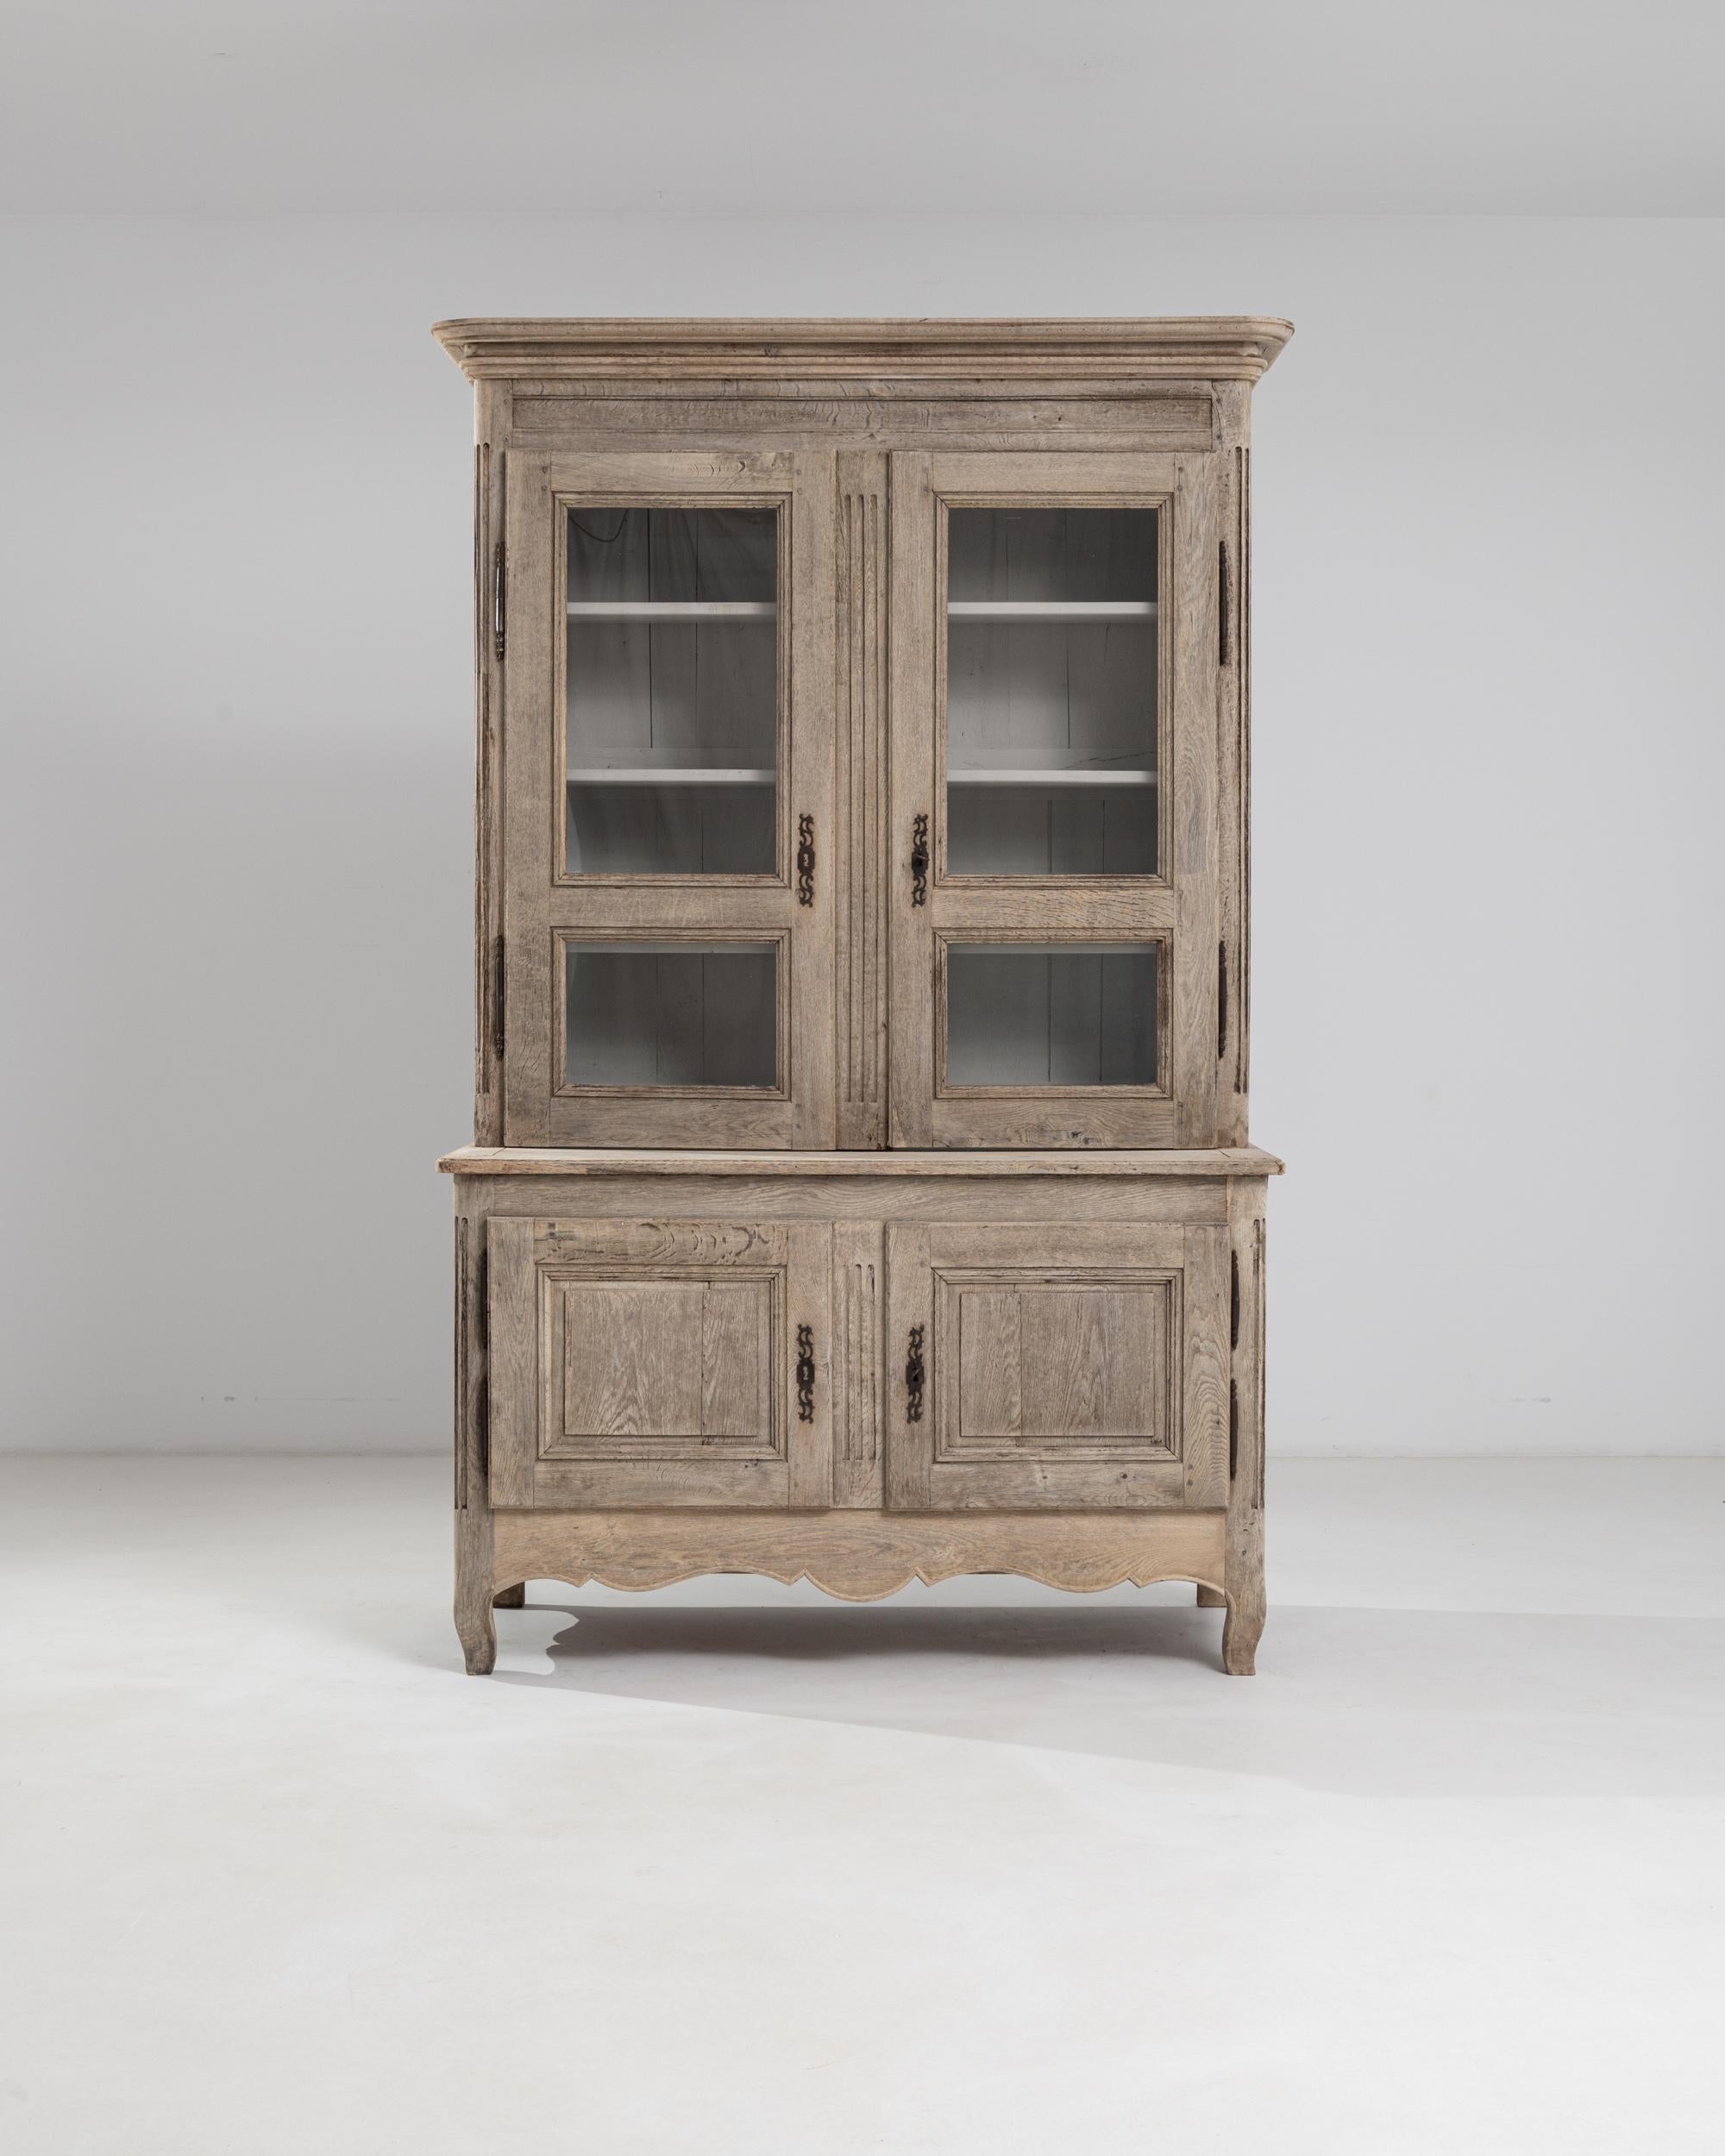 A 19th century wooden vitrine produced in France, this tall vitrine stands on cabriole feet and elevates above seven feet and a half. Provided with a scalloped apron and a molded cornice, the two-case piece is composed of a large four-shelf vitrine